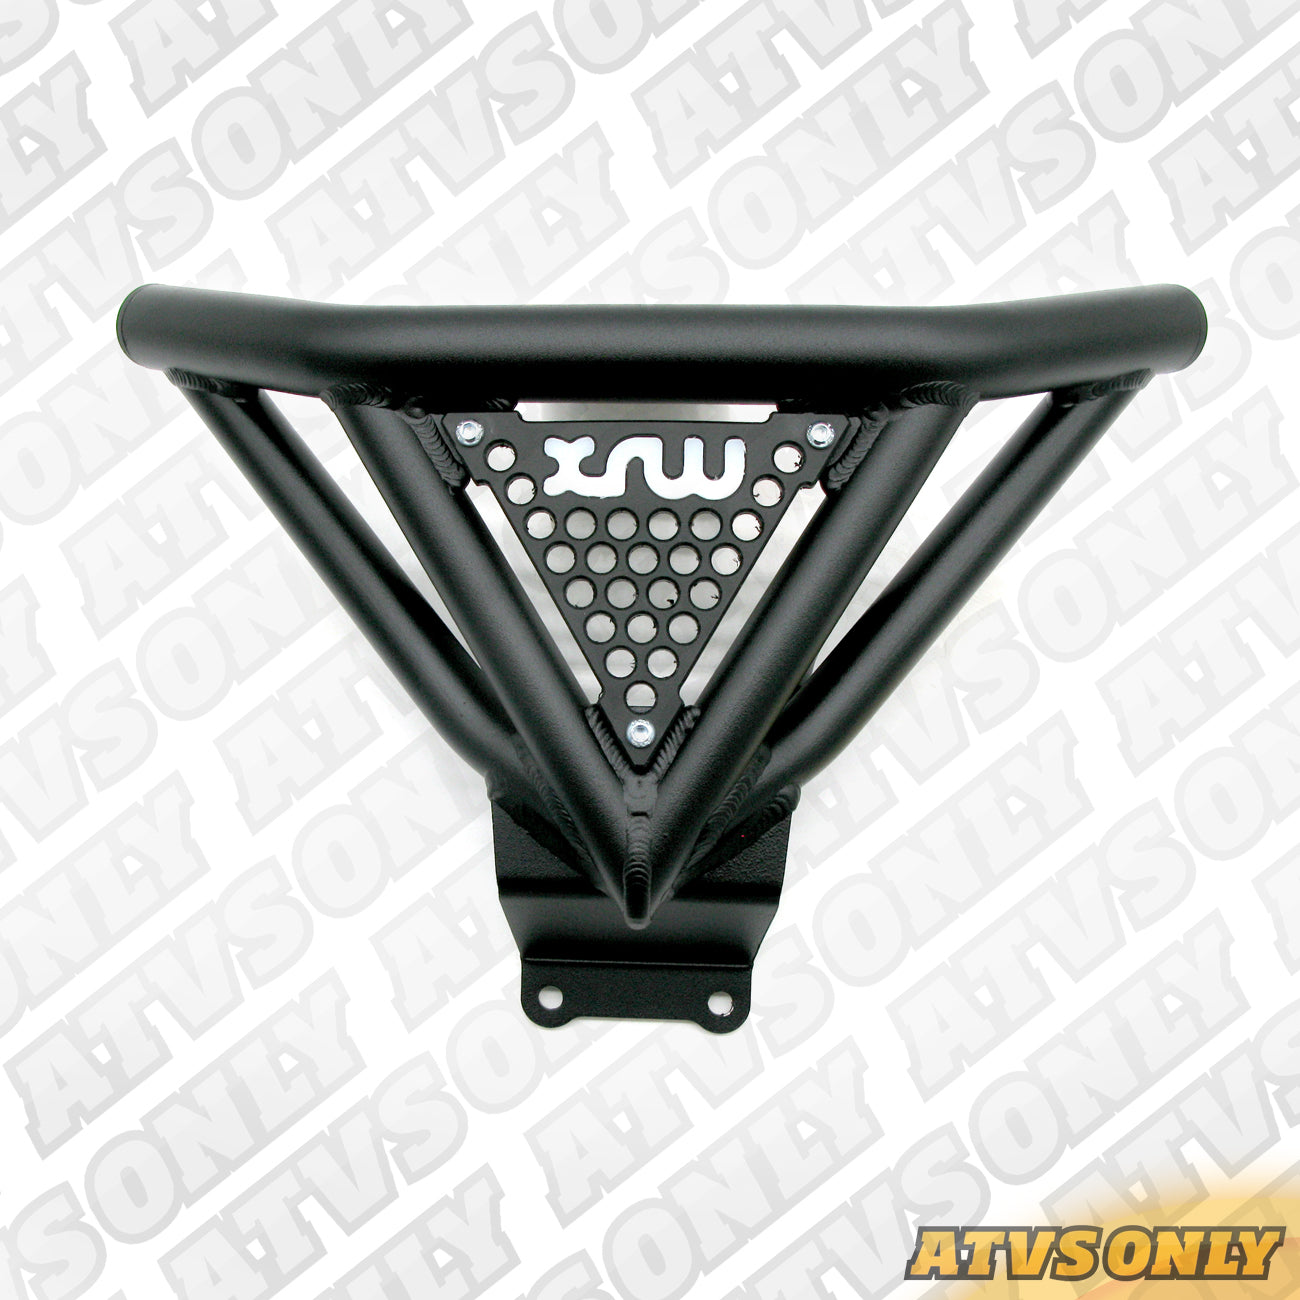 Bumpers - Front XR10 (Alloy) for Yamaha Applications